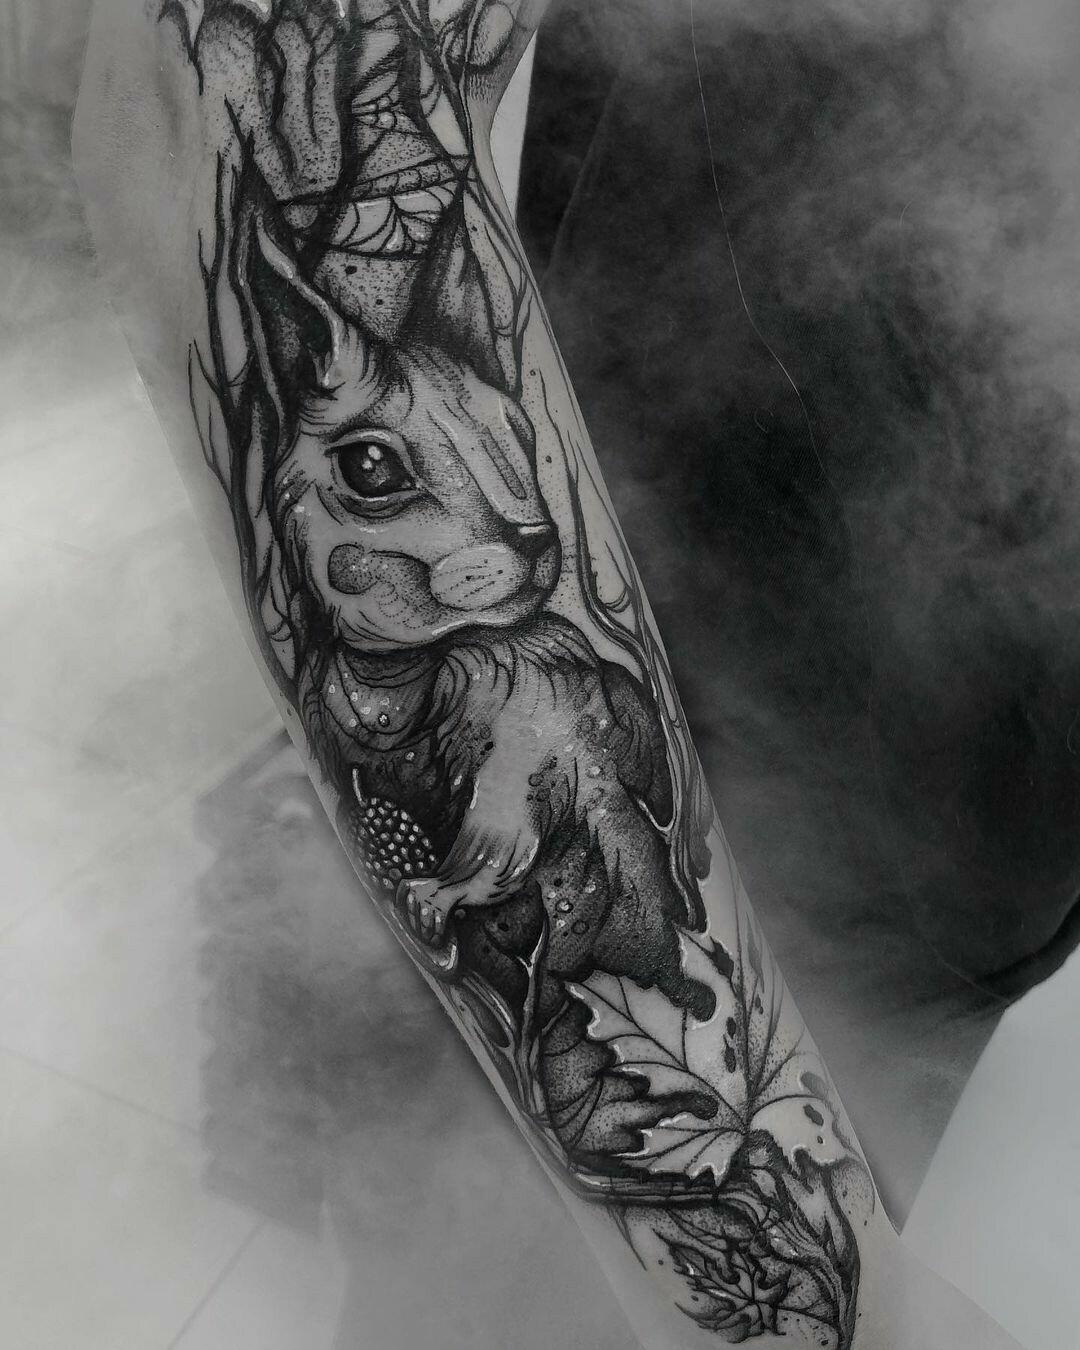 Inksearch tattoo Emanuela Latoszek 🌙 The Sacred Touch ⚜️